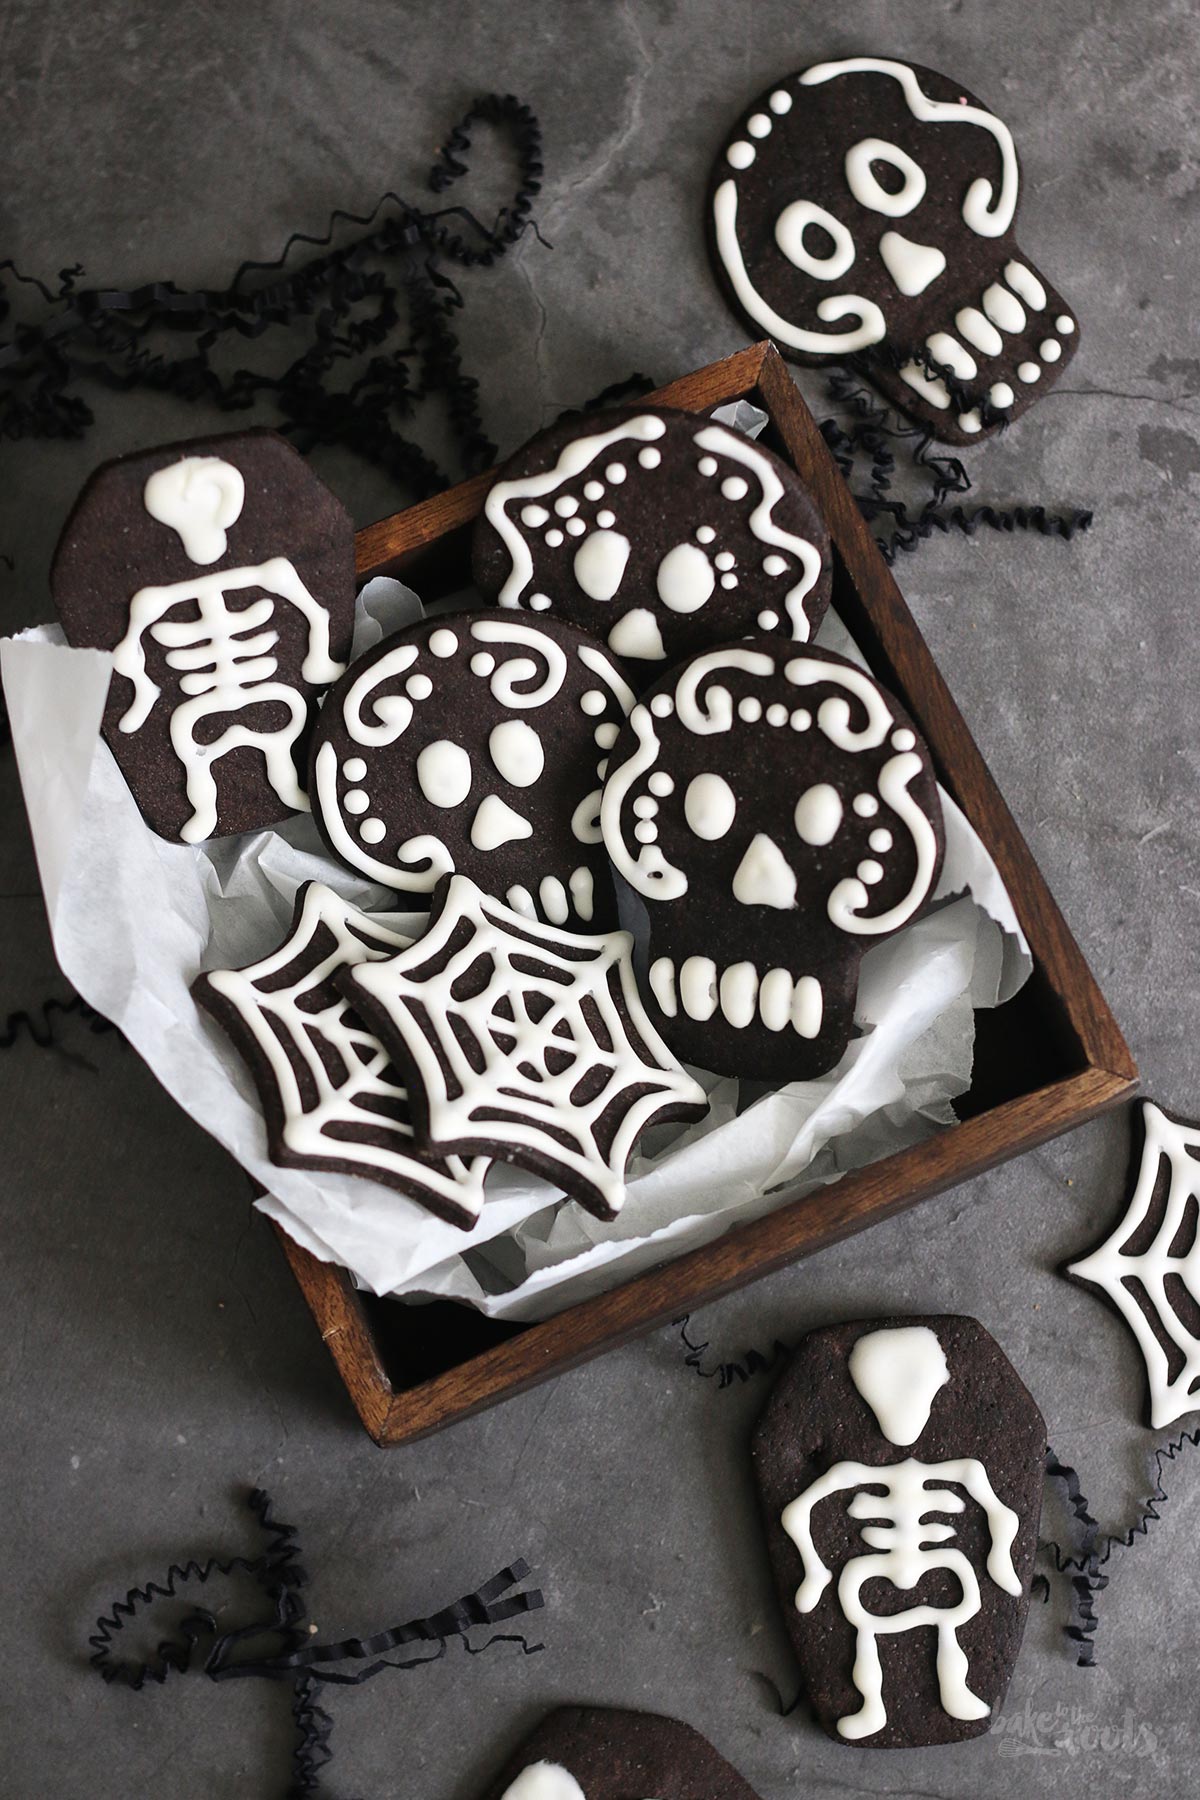 Halloween Black 'n' White Cookies | Bake to the roots